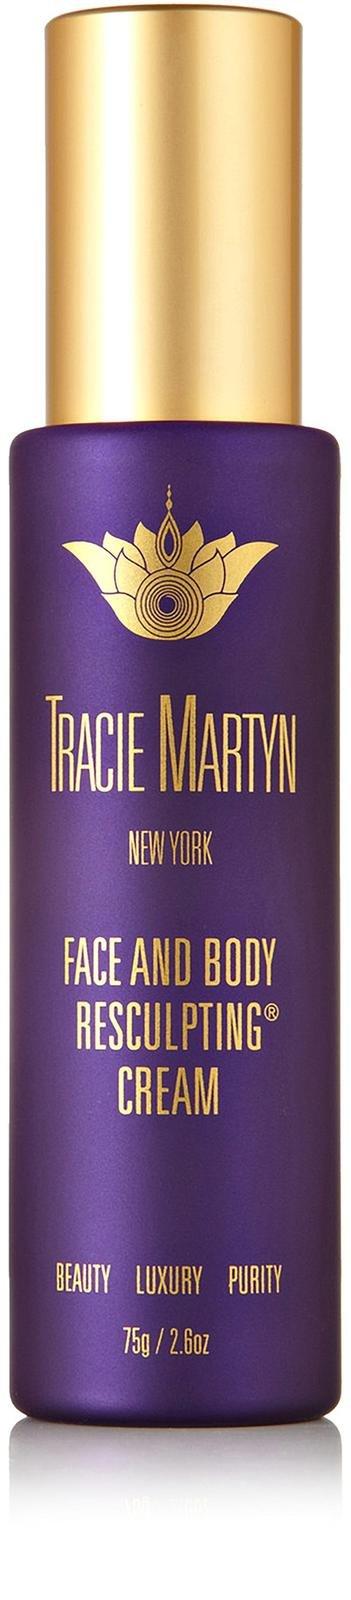 Tracie Martyn Face And Body Resculpting Cream